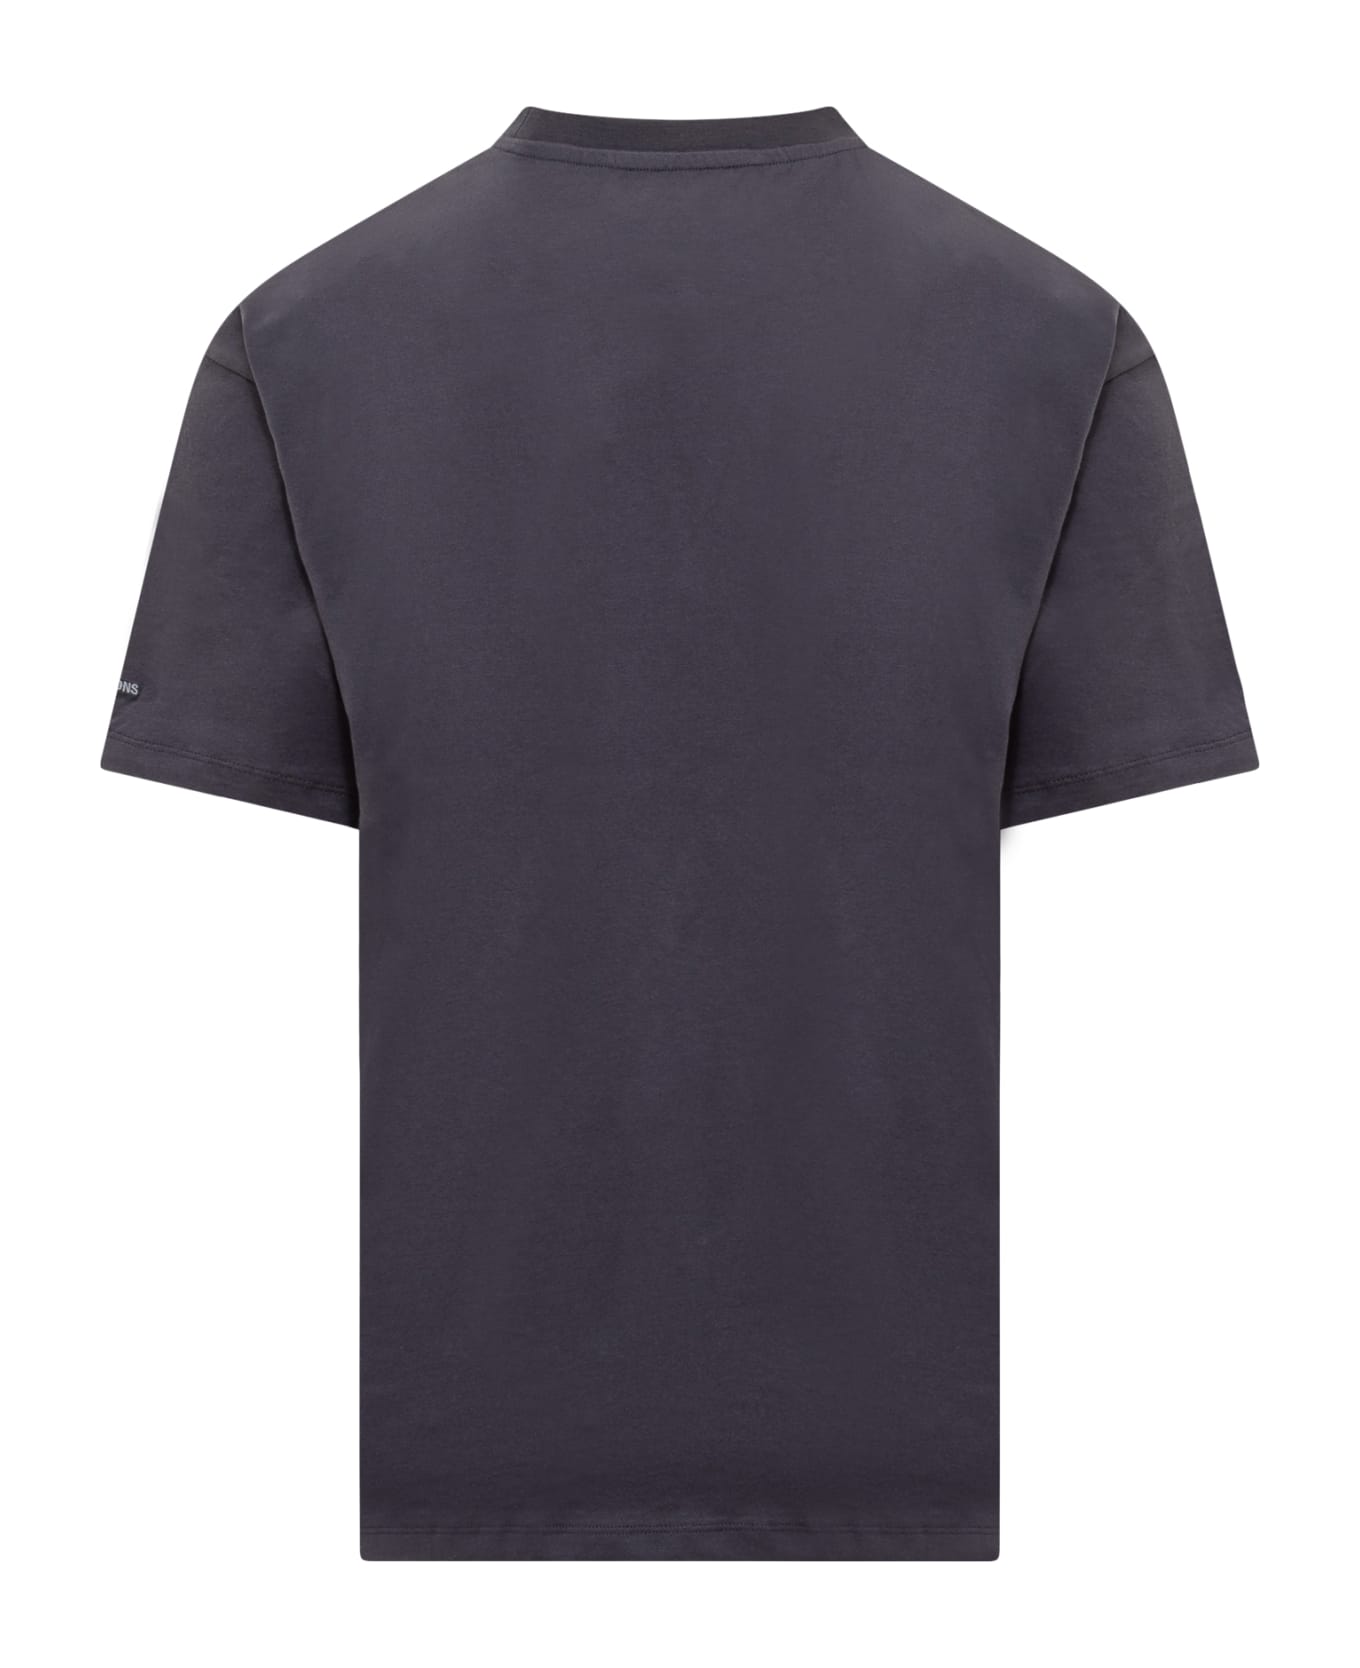 Fred Perry by Raf Simons Fred Perry X Raf Simons T-shirt With Print - NAVY BLUE シャツ